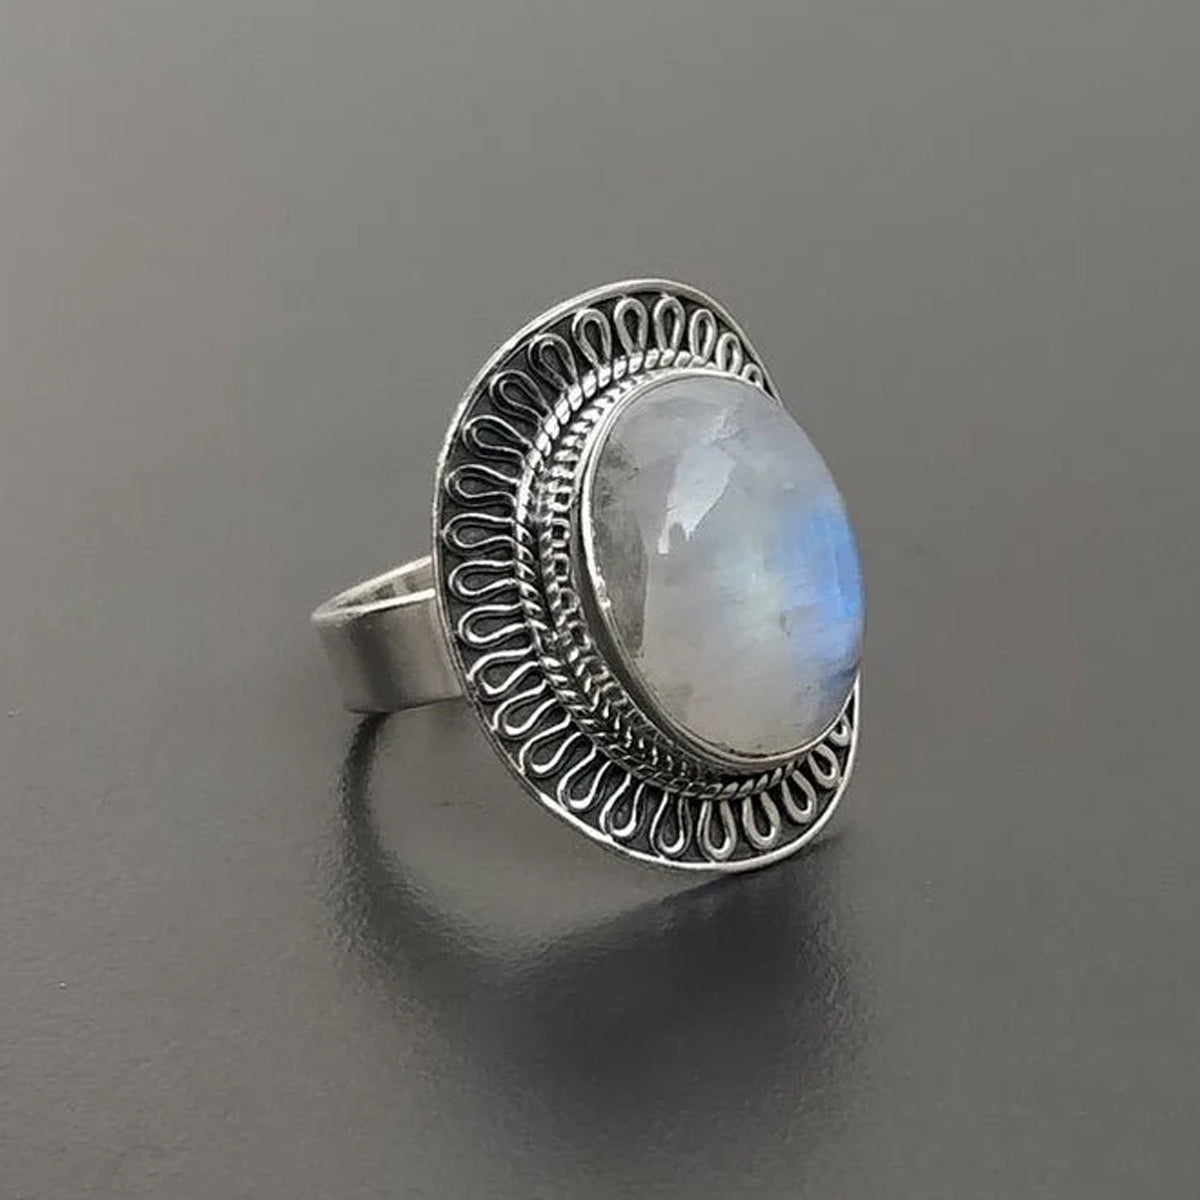 FAS275NJ Rainbow Moonstone in Sterling Silver Ring| The Gem Shop, Inc.